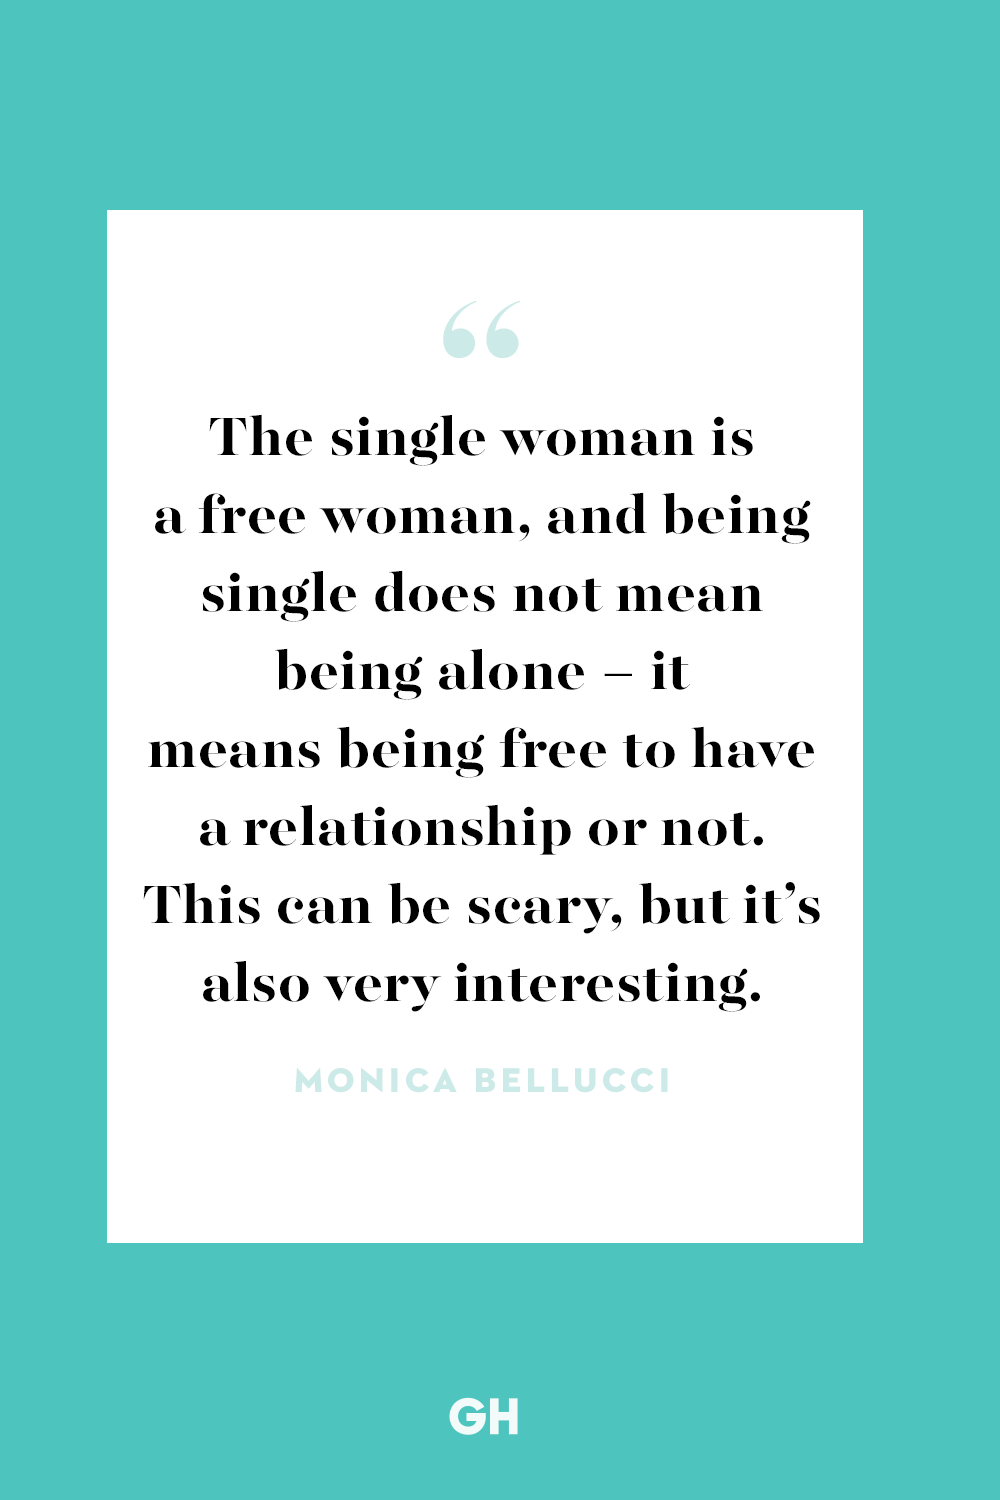 quotes about being single on holidays